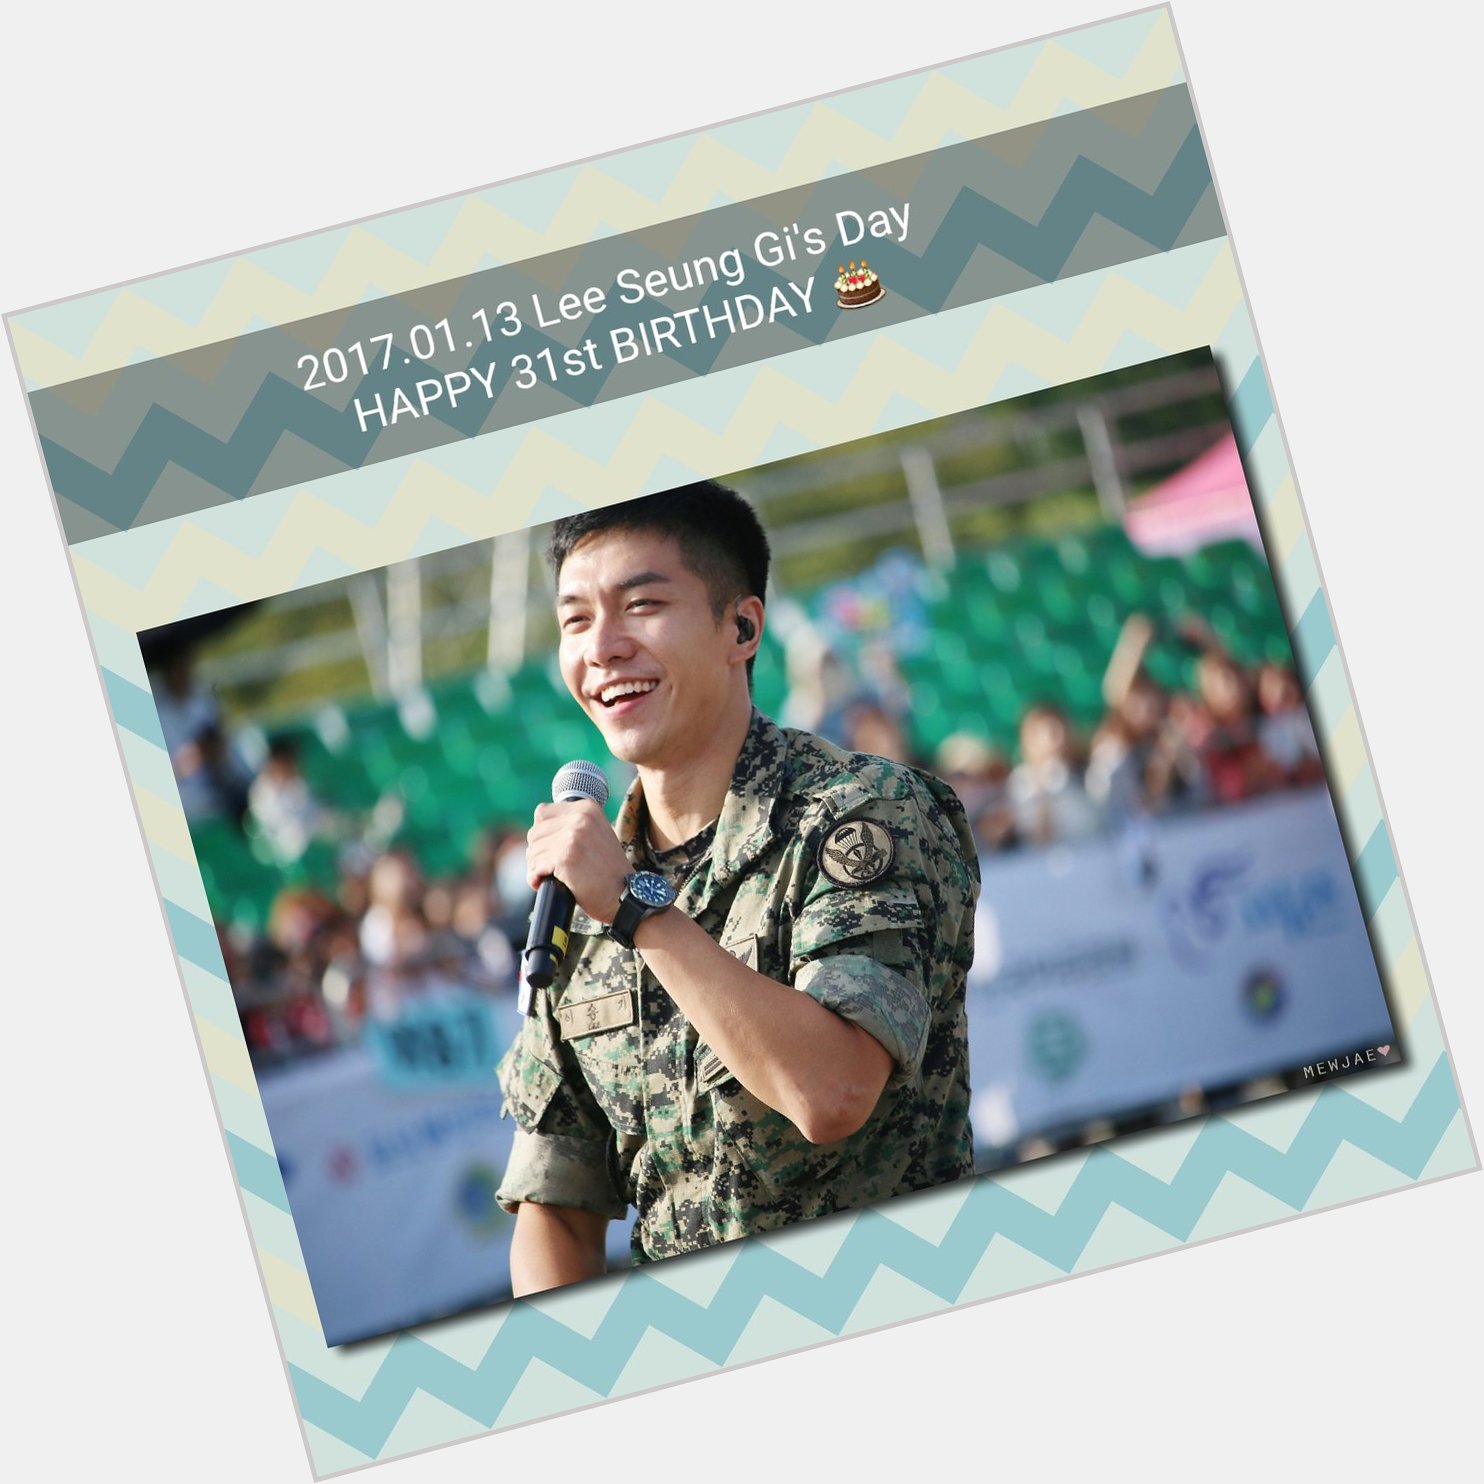 The one and only Happy 31st Birthday  to Lee Seung Gi  